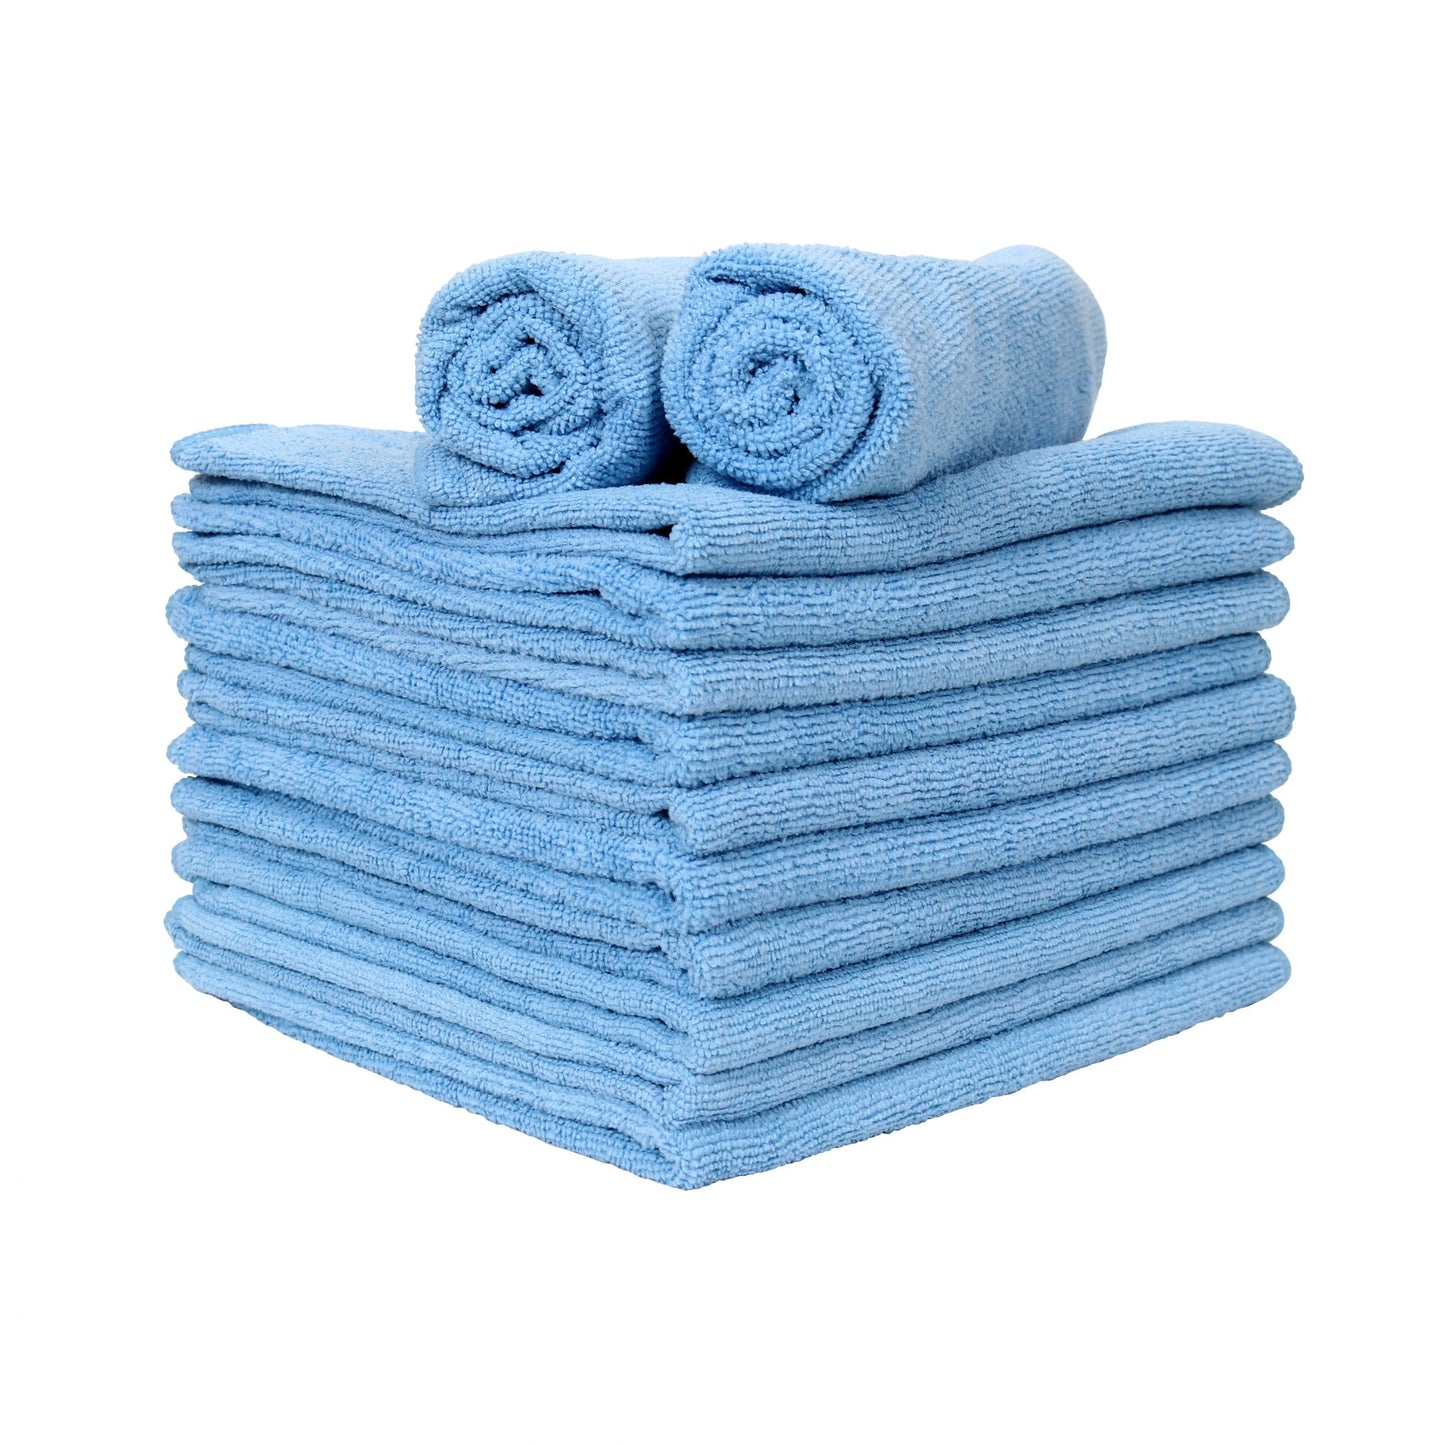 Multi-Surface Cleaning Microfiber Towel (Set of 3)